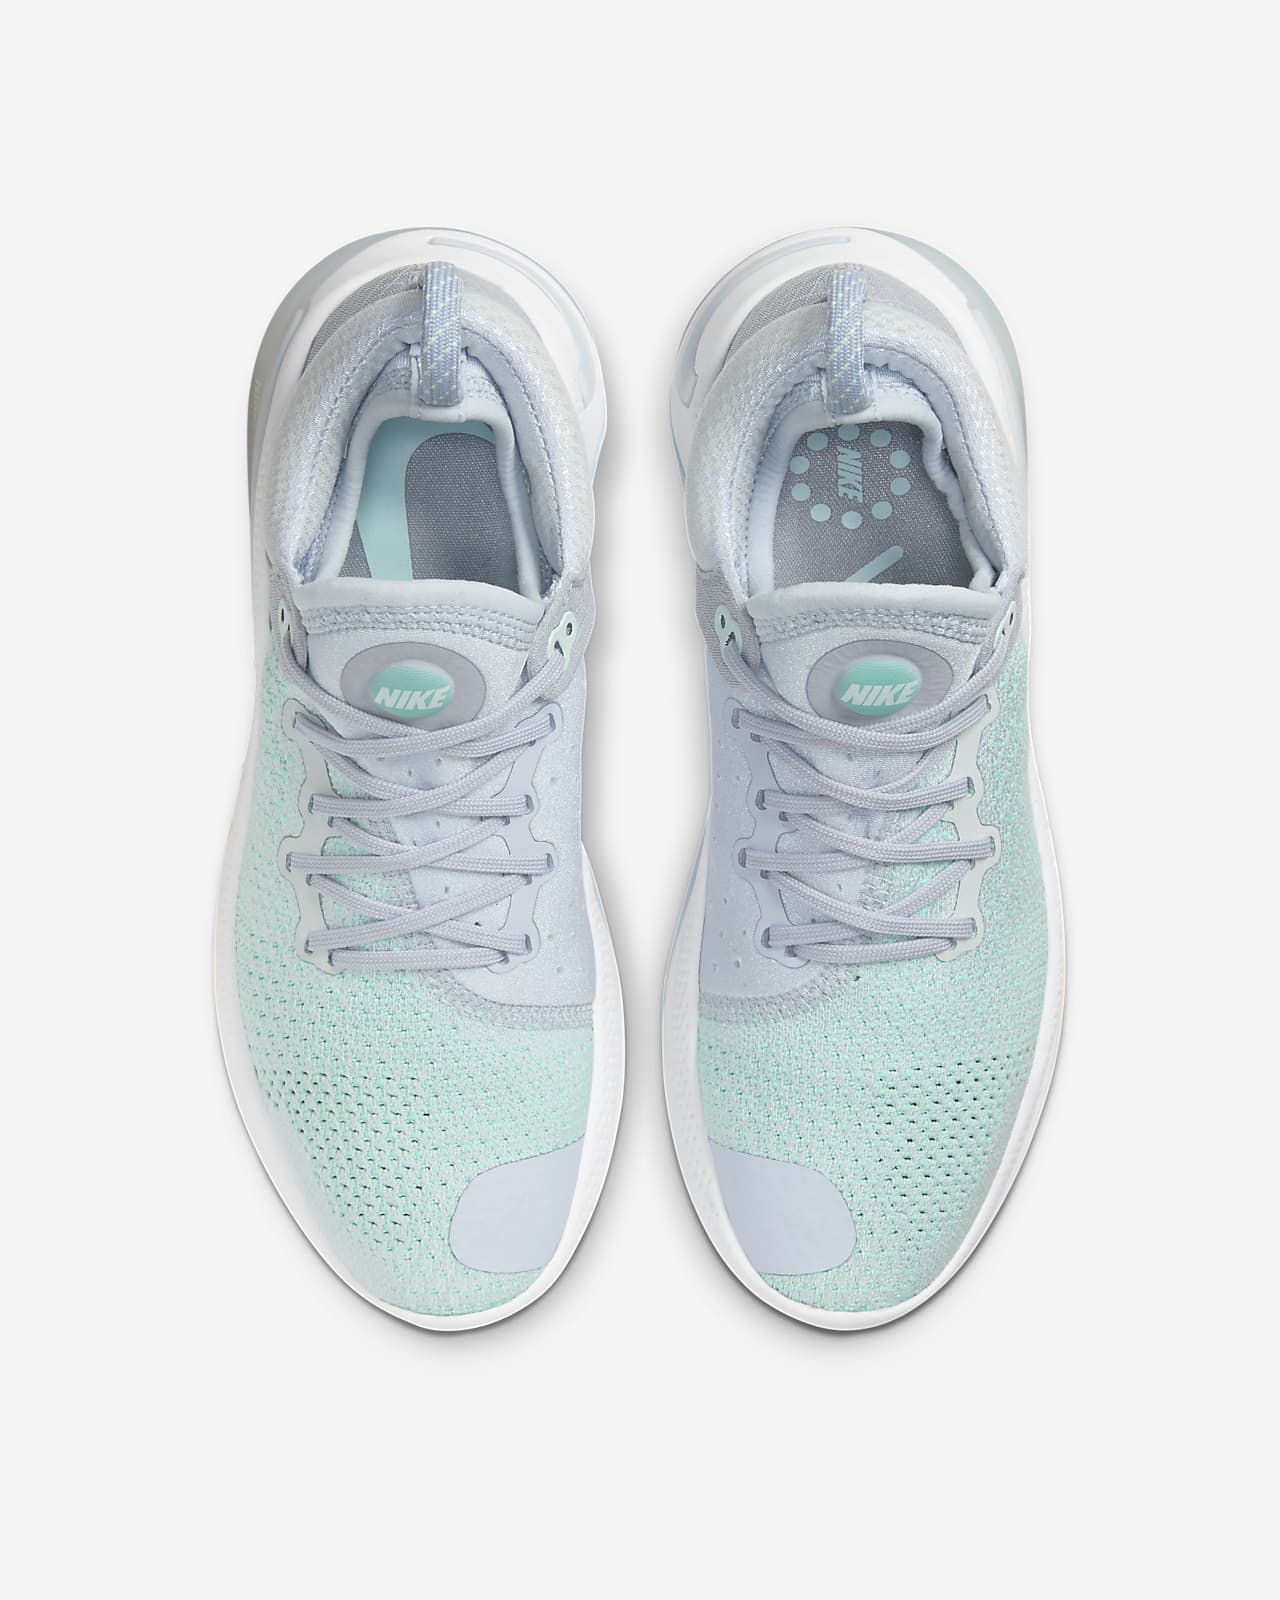 grey and teal nike shoes